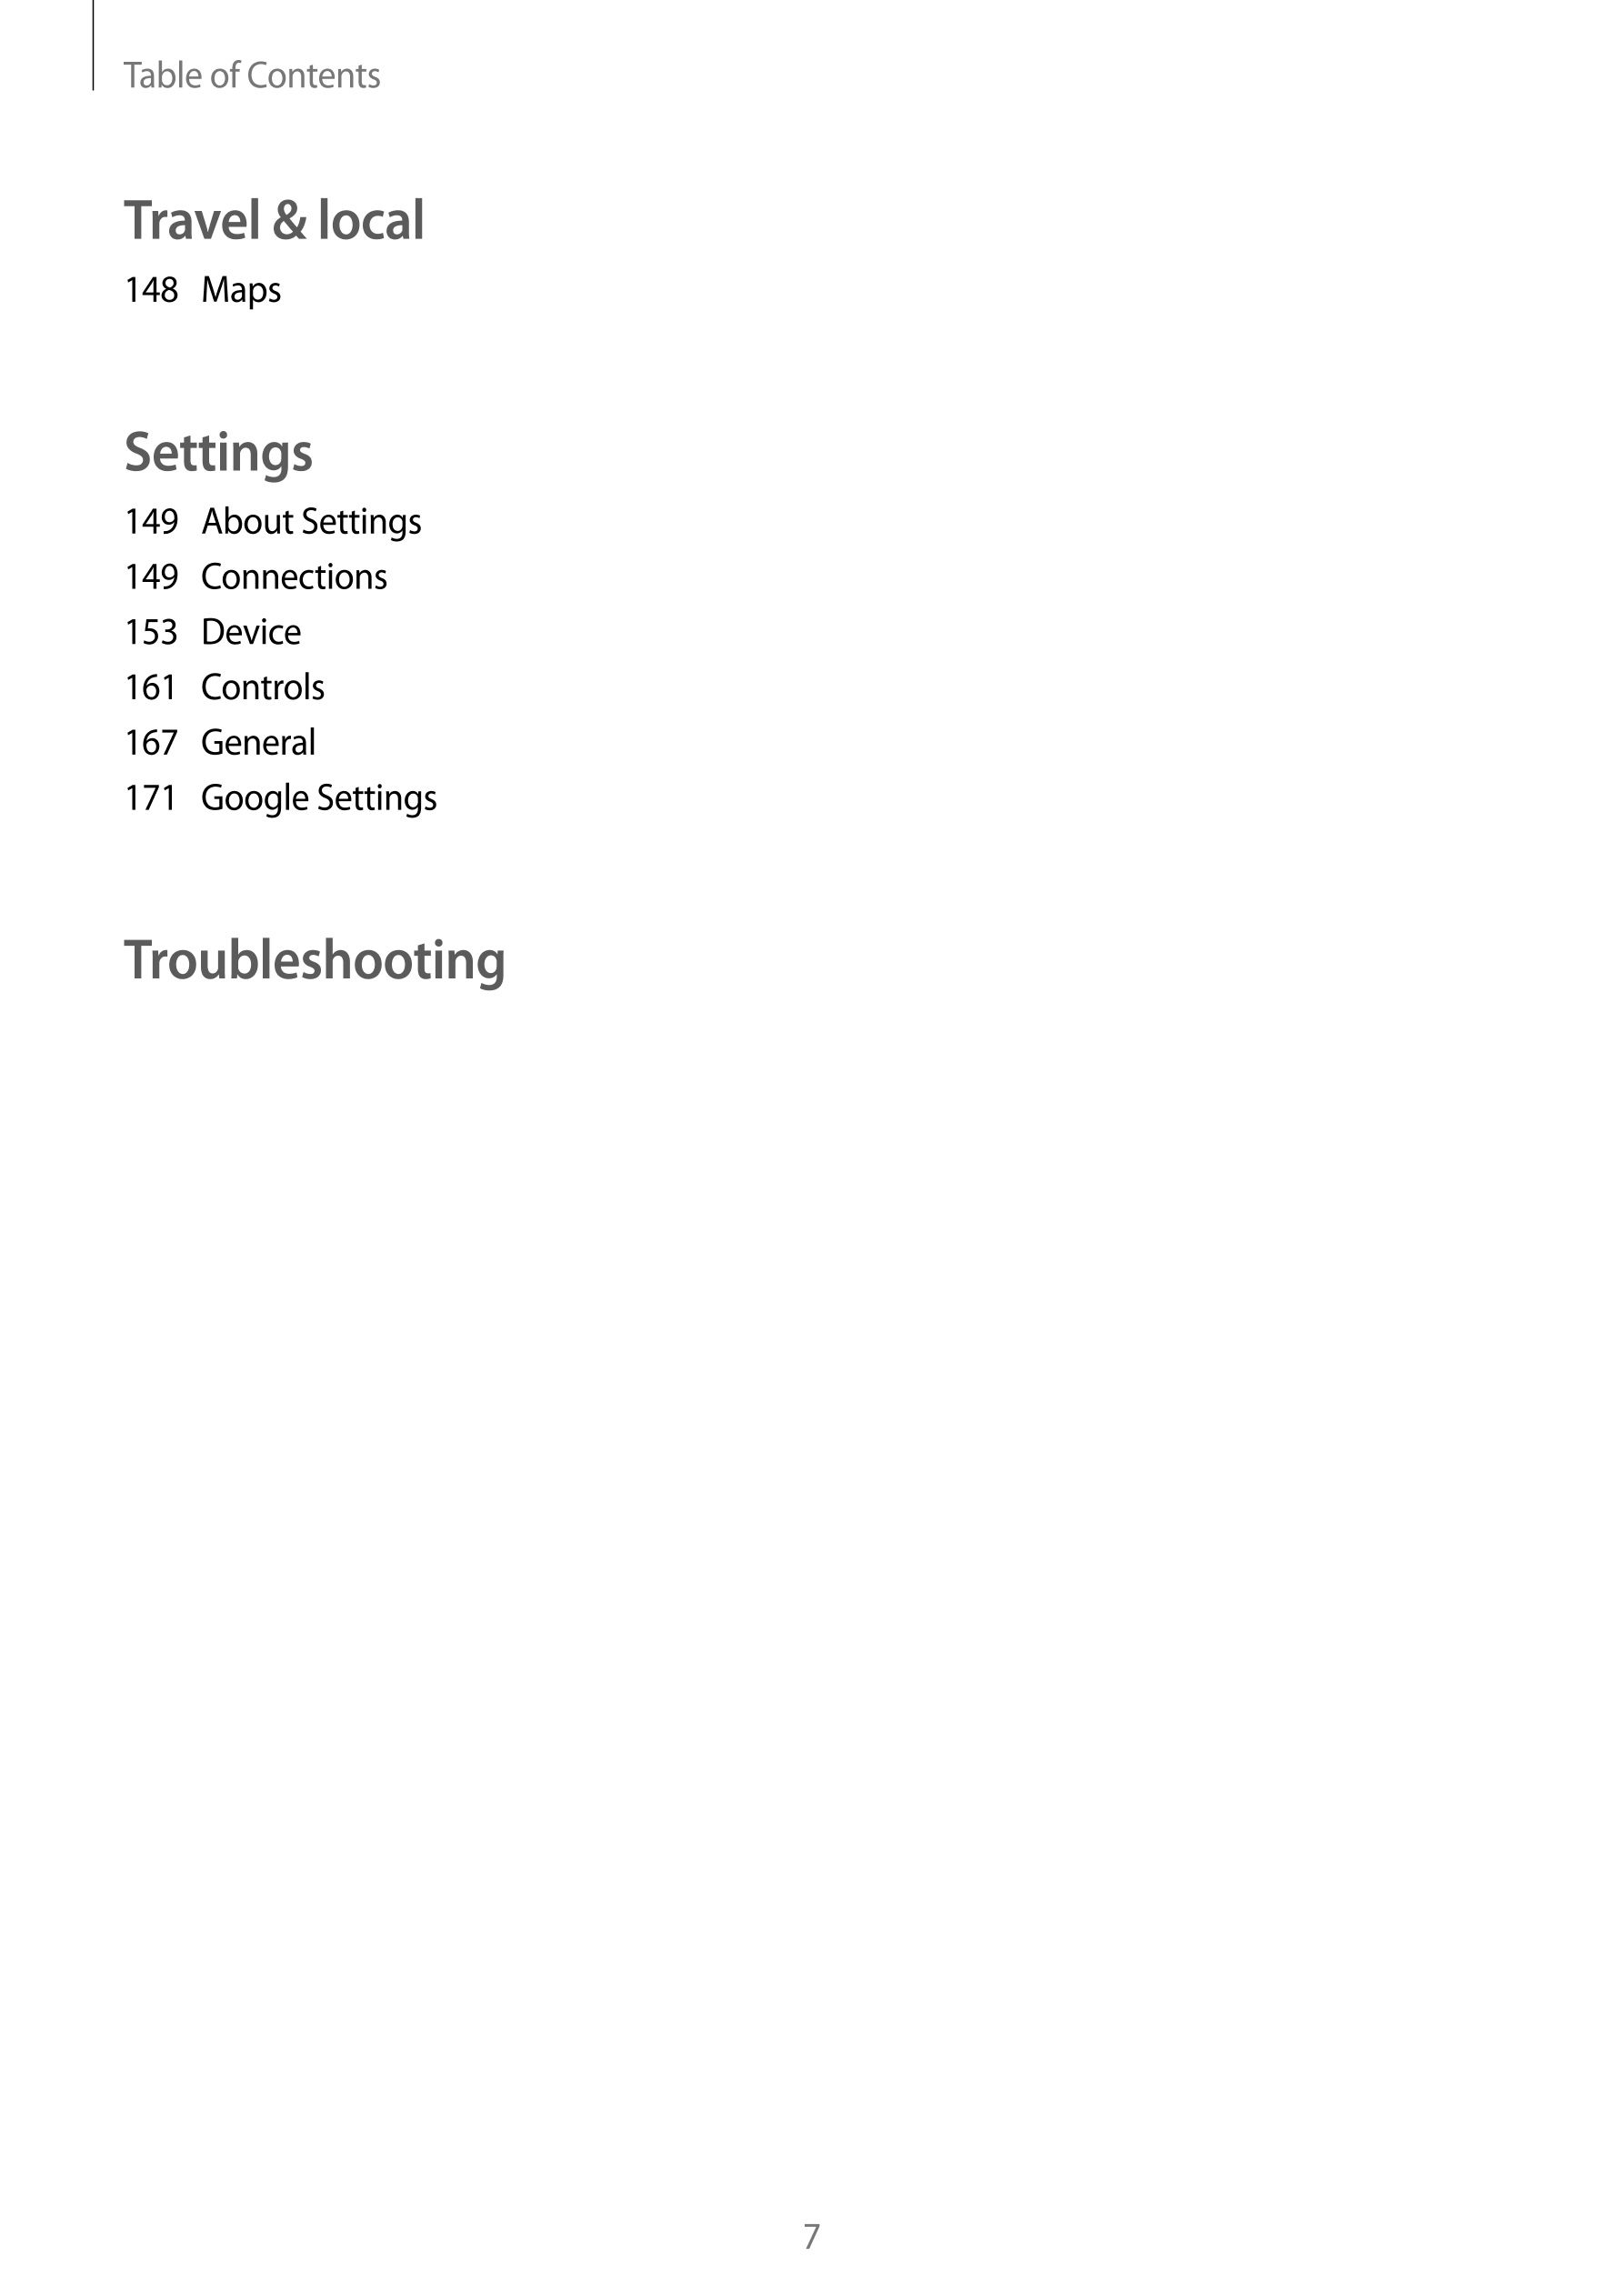 Table of Contents
Travel & local
148  Maps
Settings
149  About Settings
149  Connections
153  Device
161  Controls
167  General
